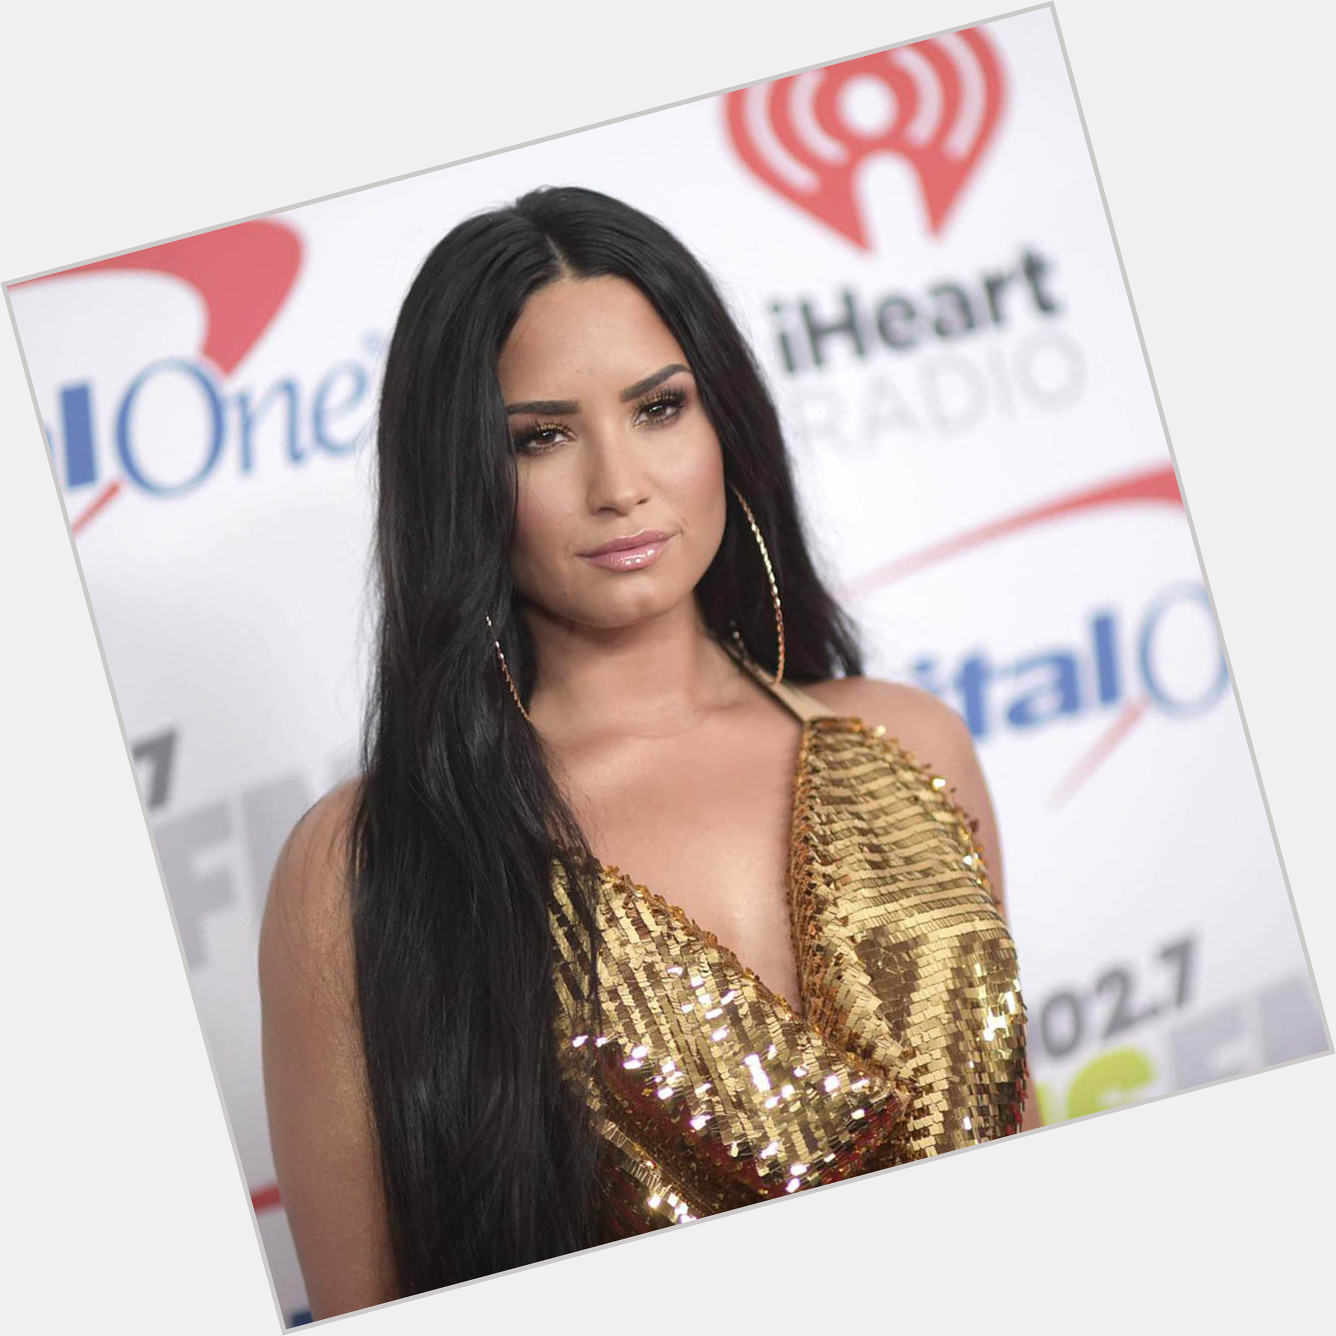 Happy Birthday, Demi Lovato! The singer is 28 years old today. Join us in wishing her a happy day!  